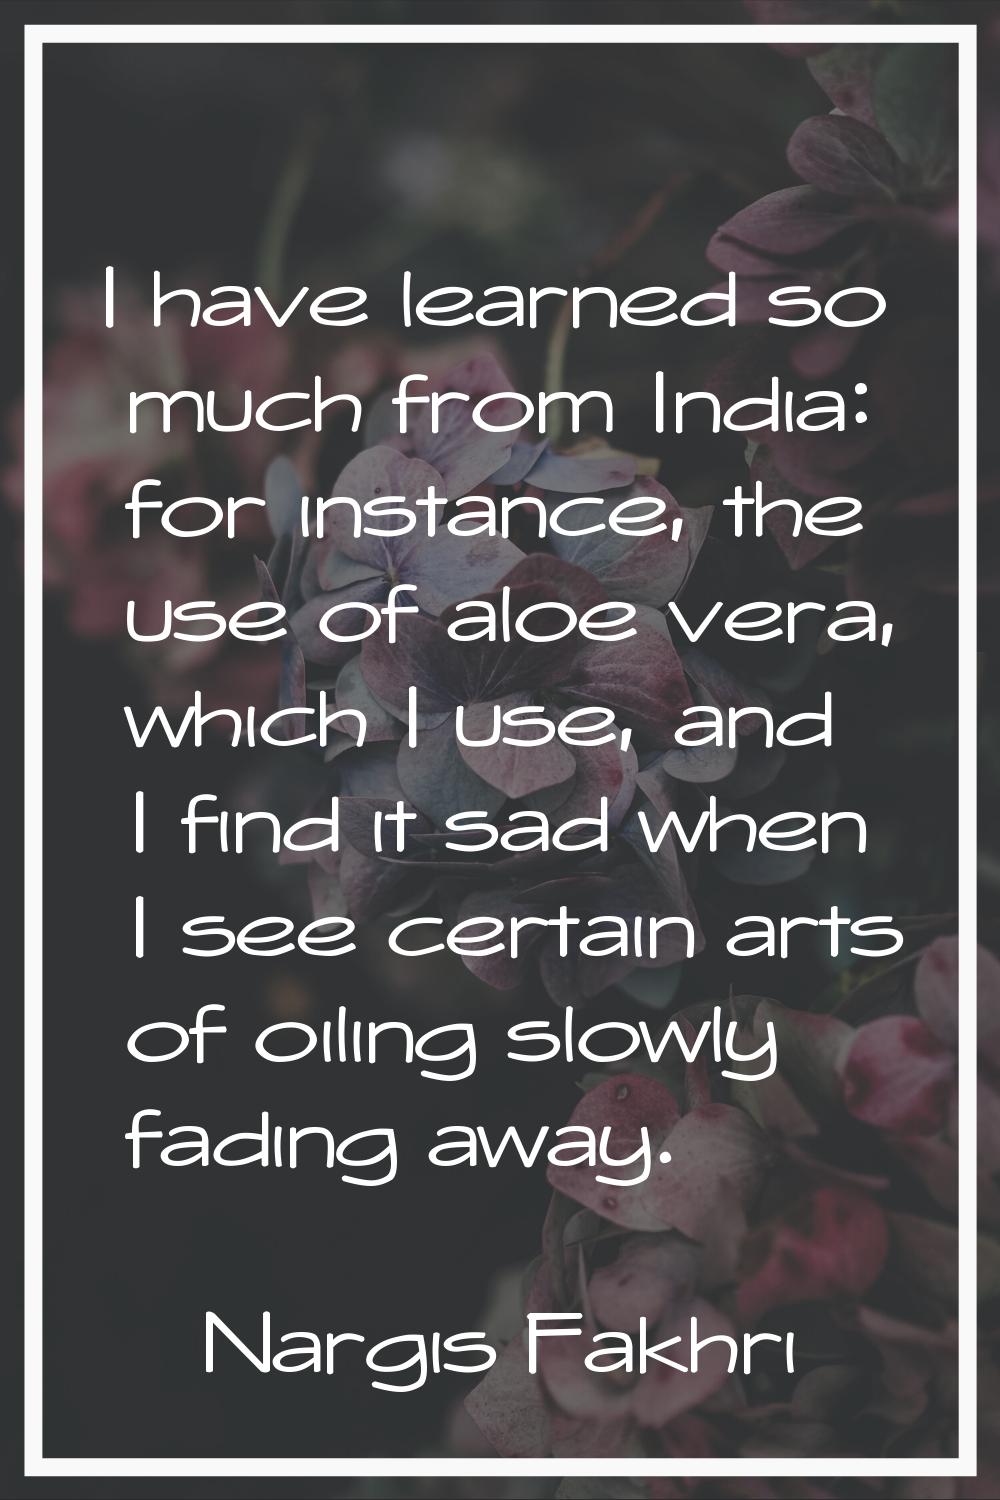 I have learned so much from India: for instance, the use of aloe vera, which I use, and I find it s